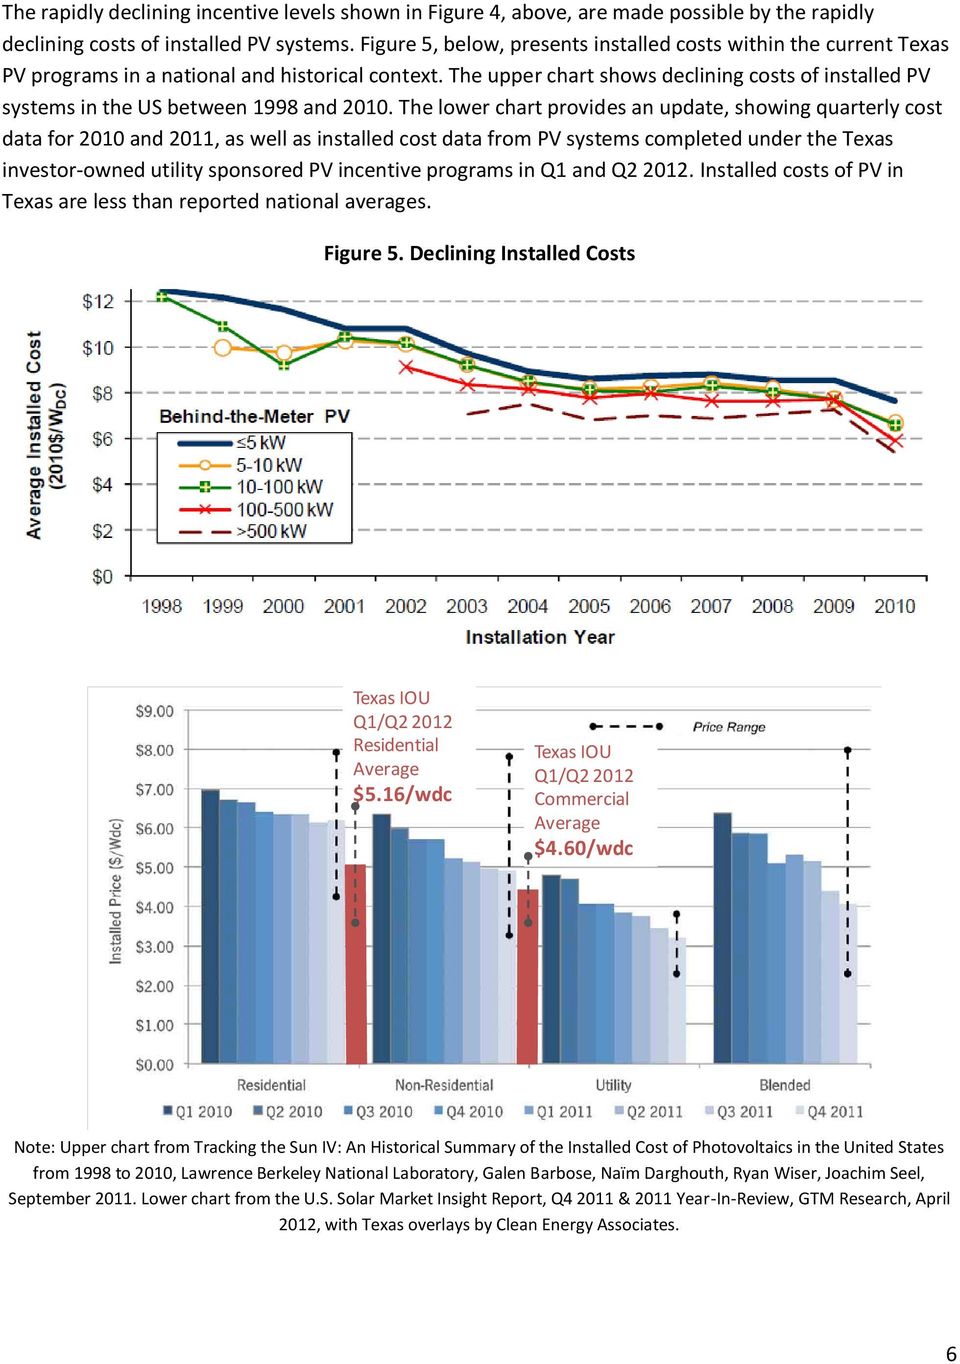 The upper chart shows declining costs of installed PV systems in the US between 1998 and 2010.